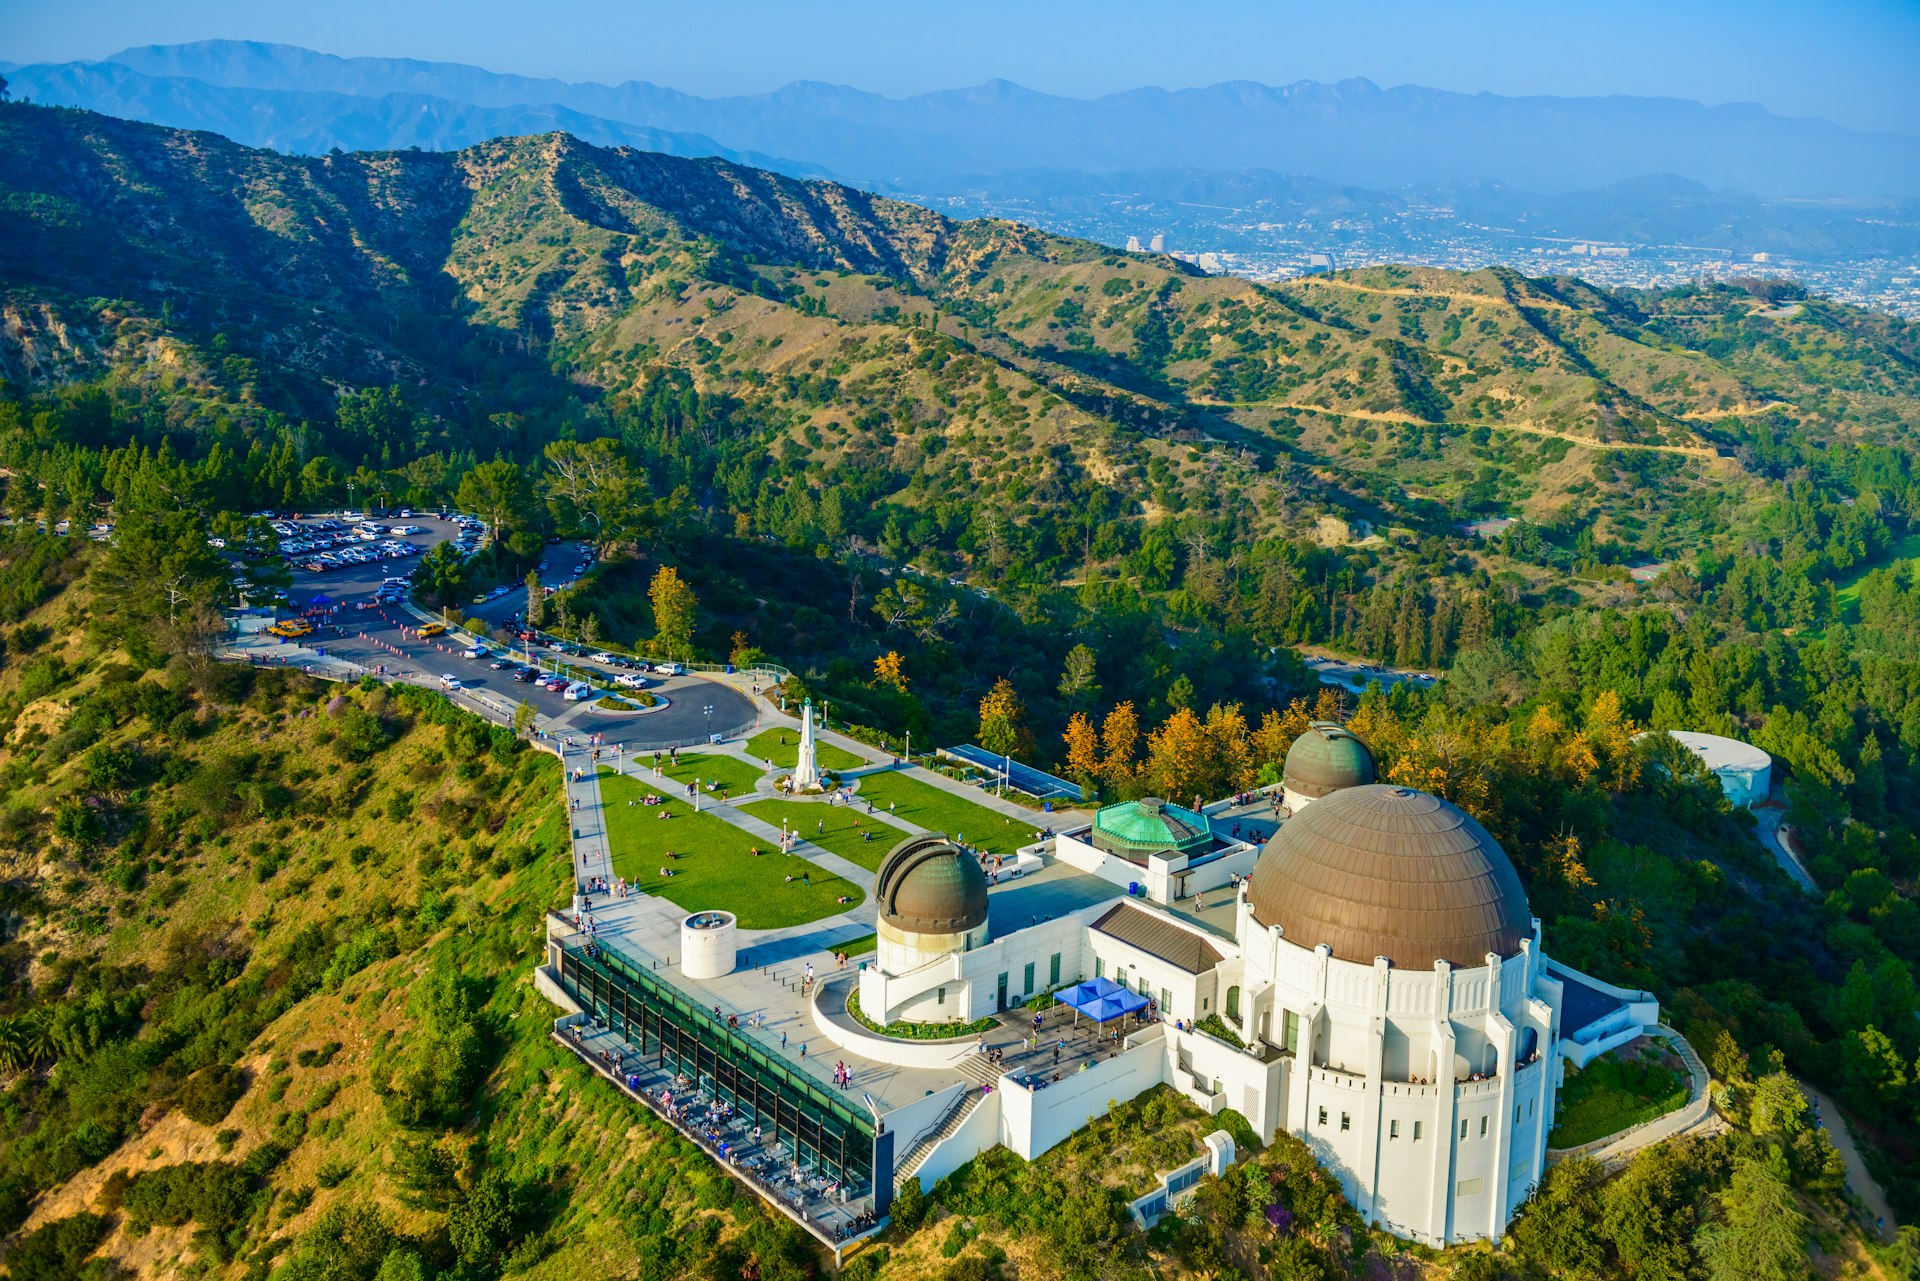 An aerial view of Griffith Observatory in Los Angeles